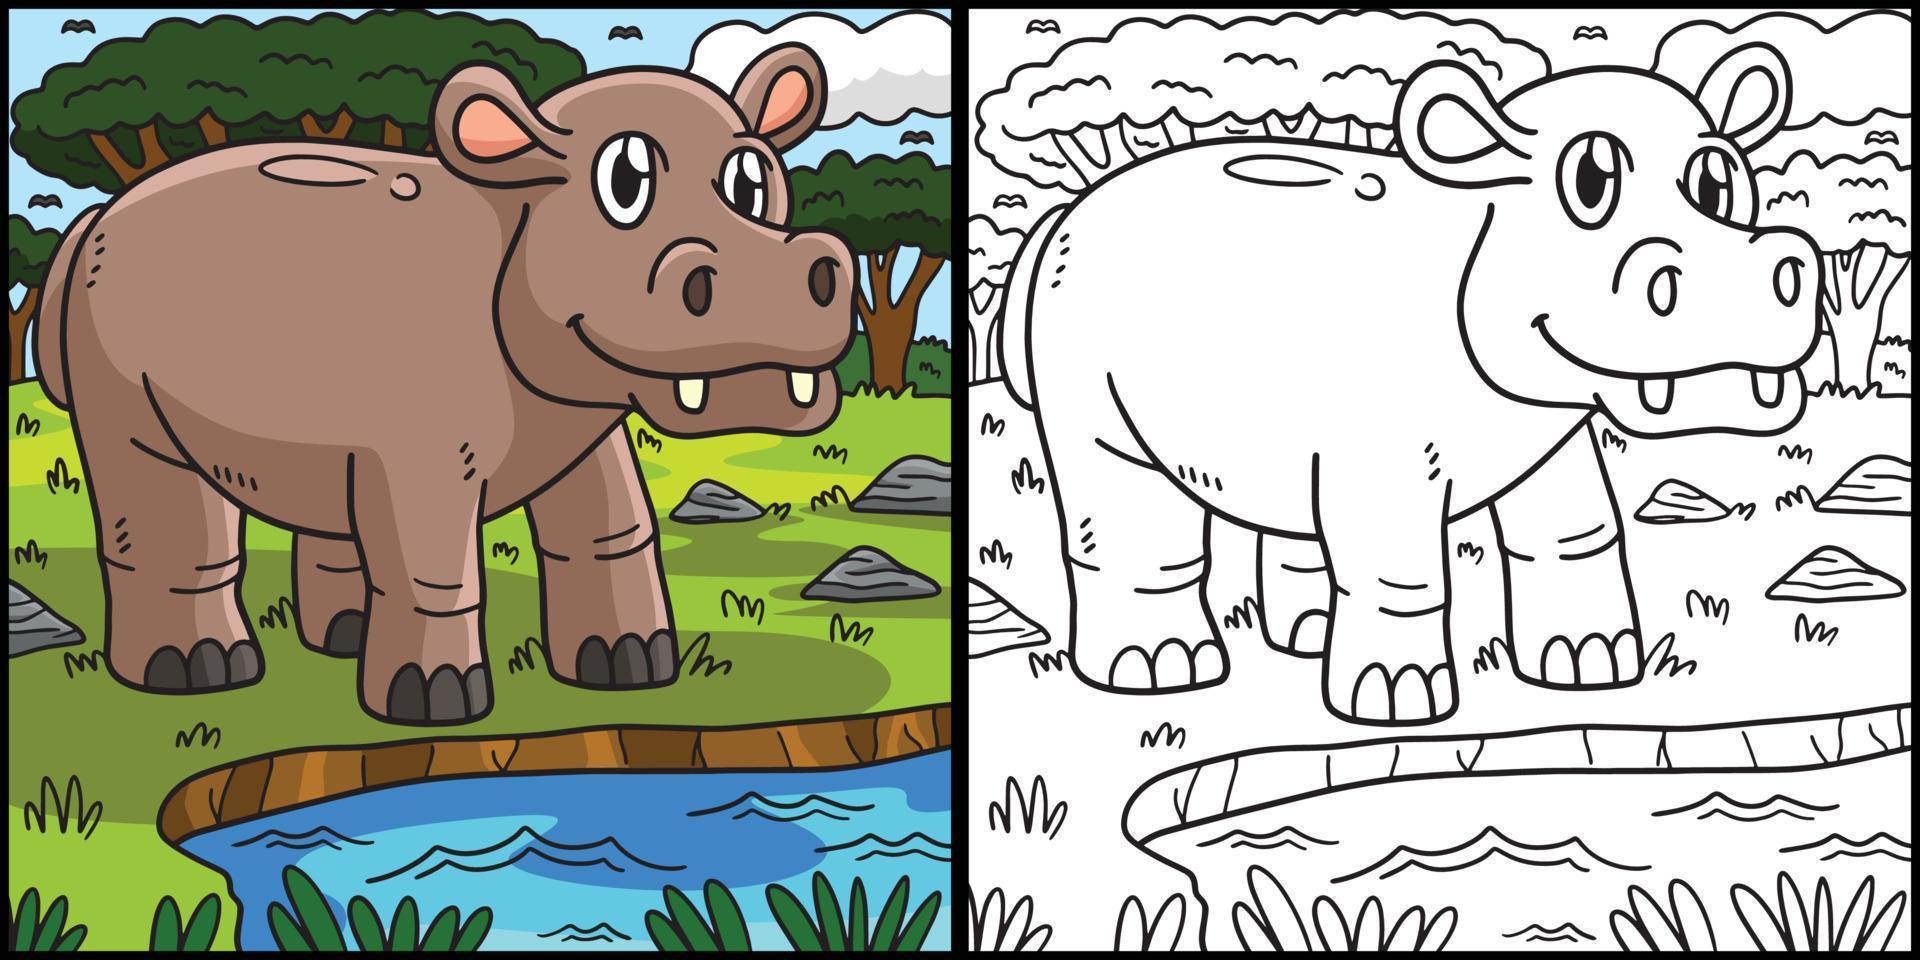 Hippopotamus Coloring Page Colored Illustration vector